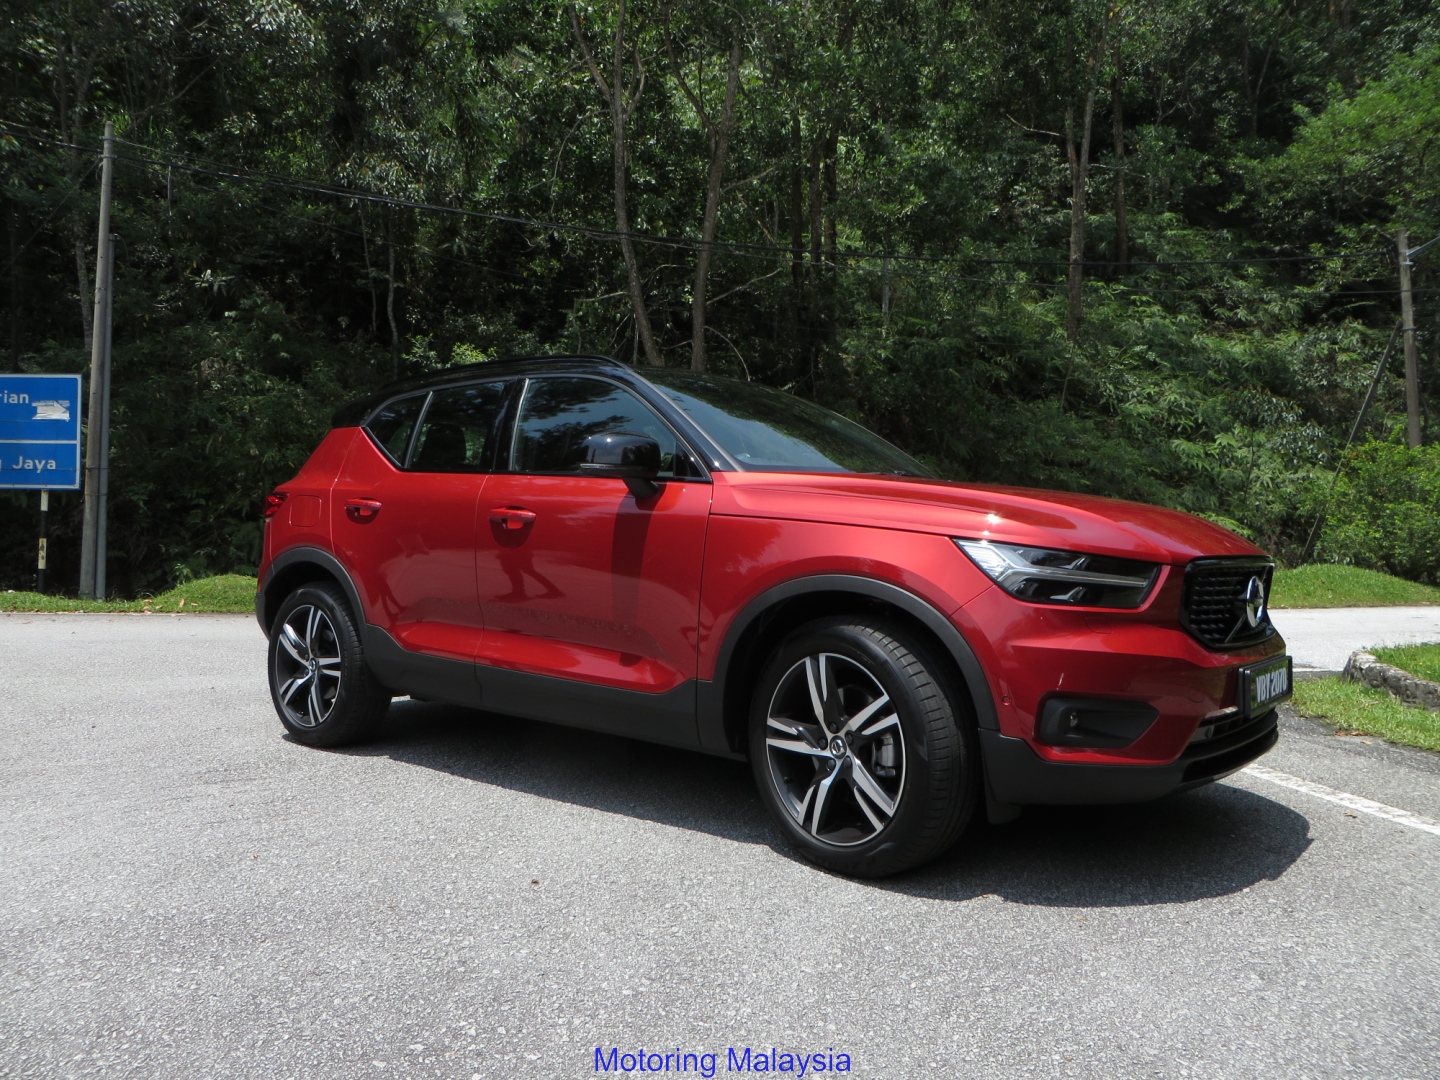 Motoring-Malaysia: First Test Drive: 2018 Volvo XC40 T5 R-Design